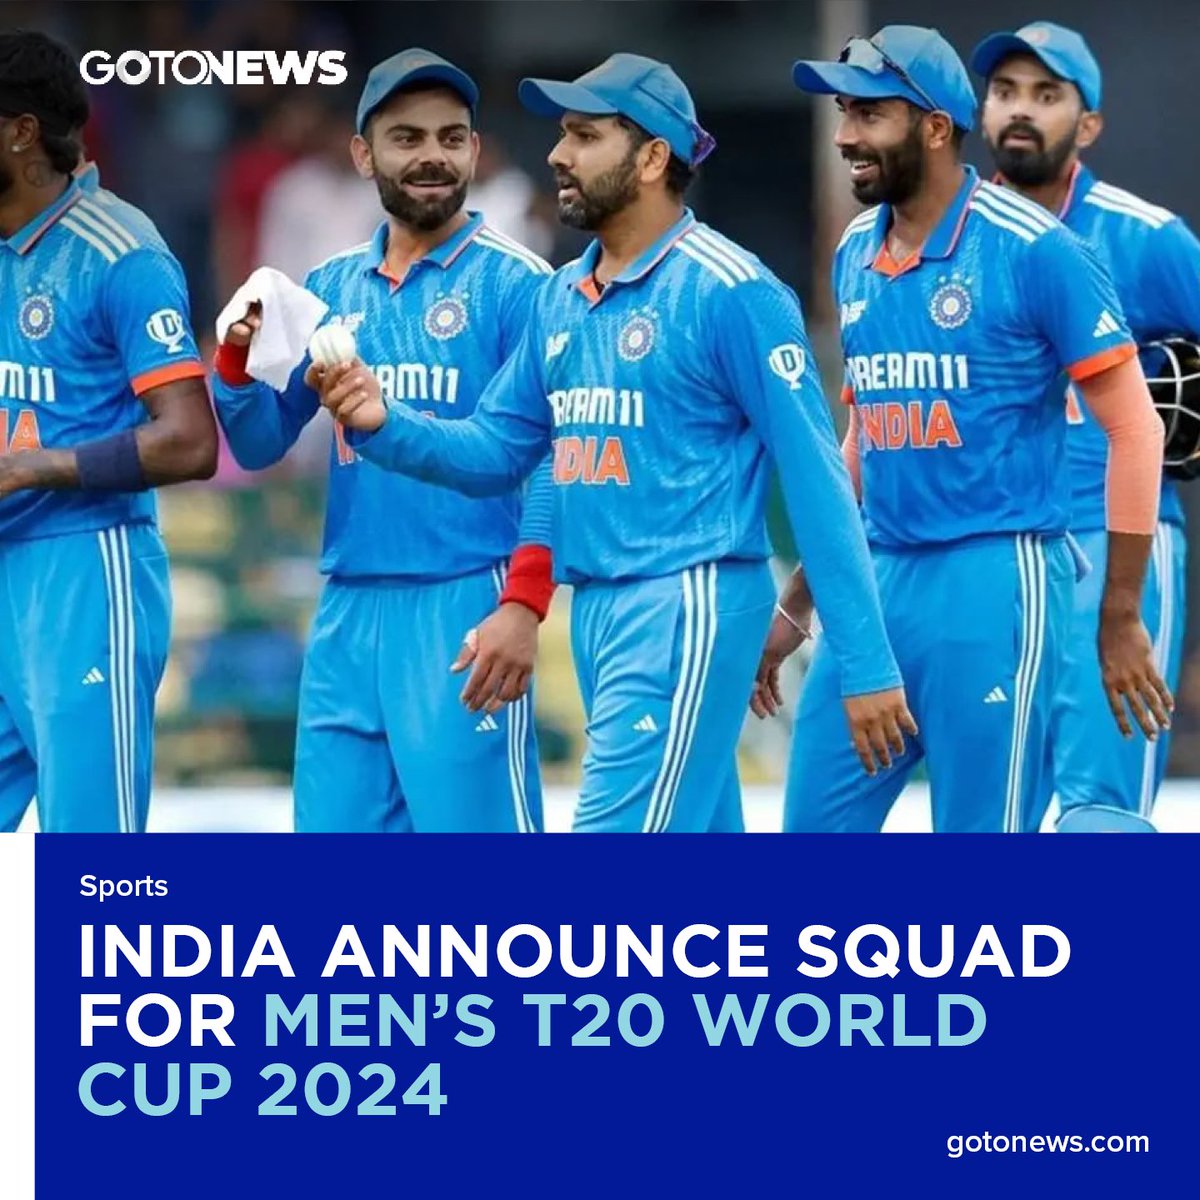 Rohit Sharma leads India's charge in the ICC Men’s T20 World Cup 2024 with a star-studded squad. 
gotonews.com
#icct20wc2024 #T20WC2024 #indiancricketteam #bcci #rohitsharma #viratkohli #indiasquad #gotonews